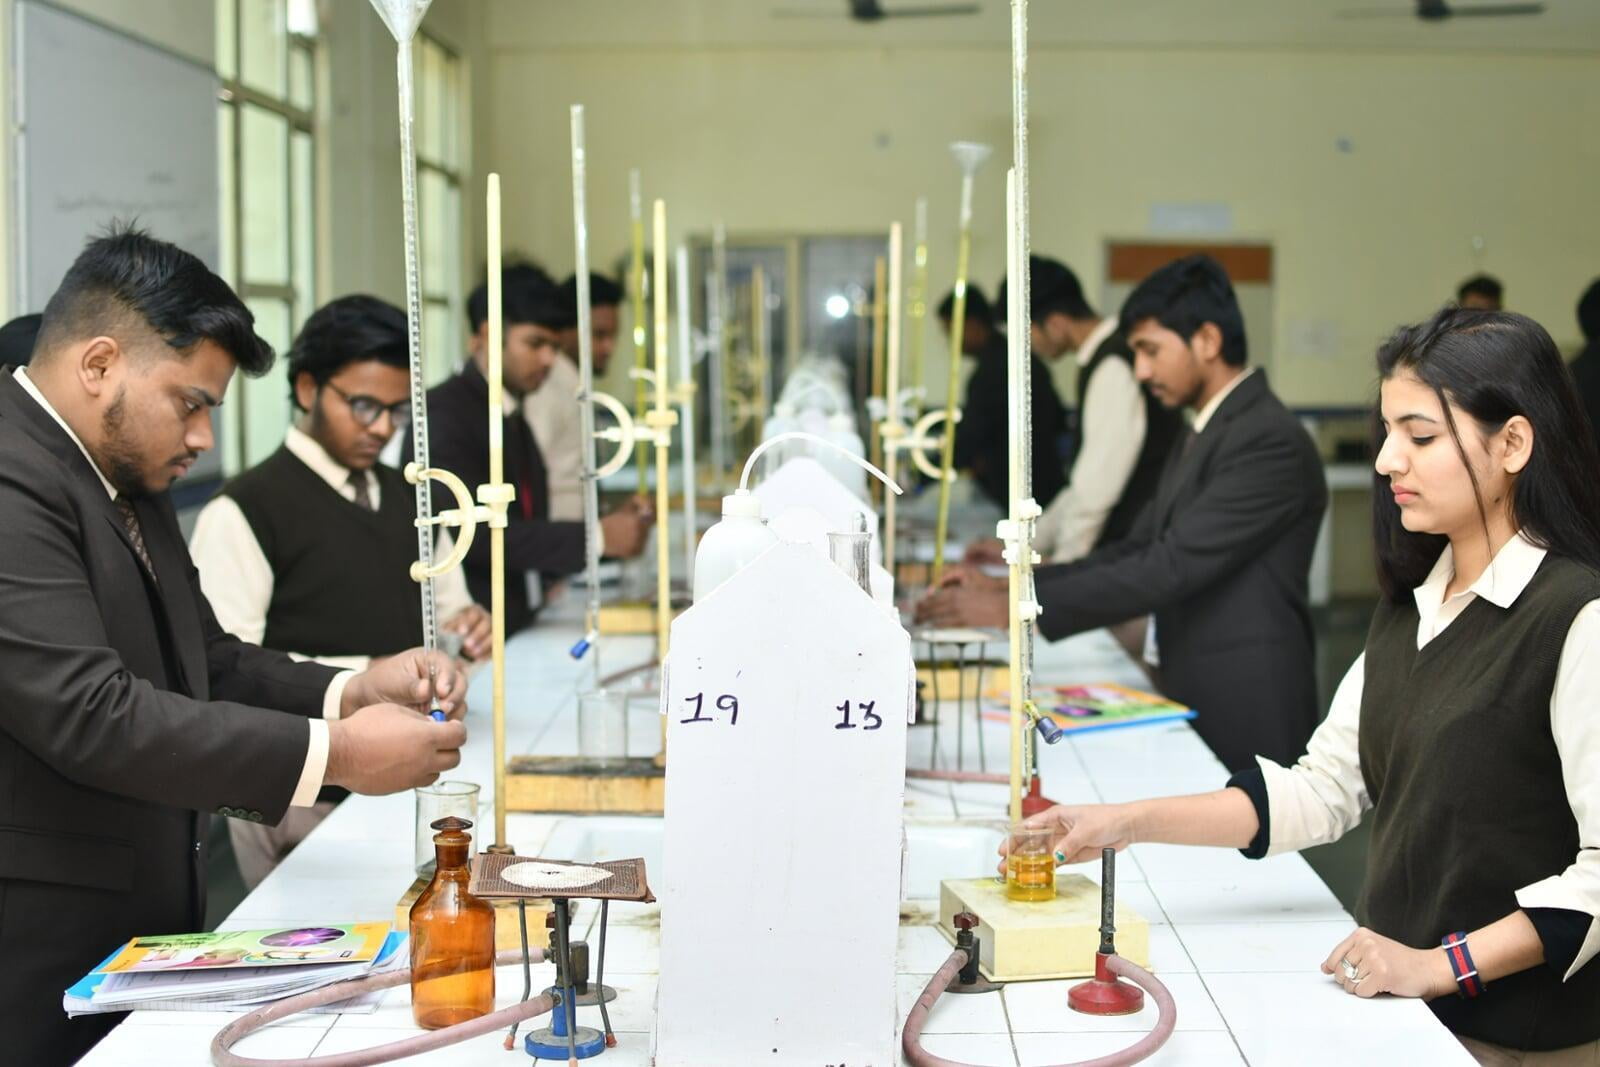 Chemistry Lab at ITS